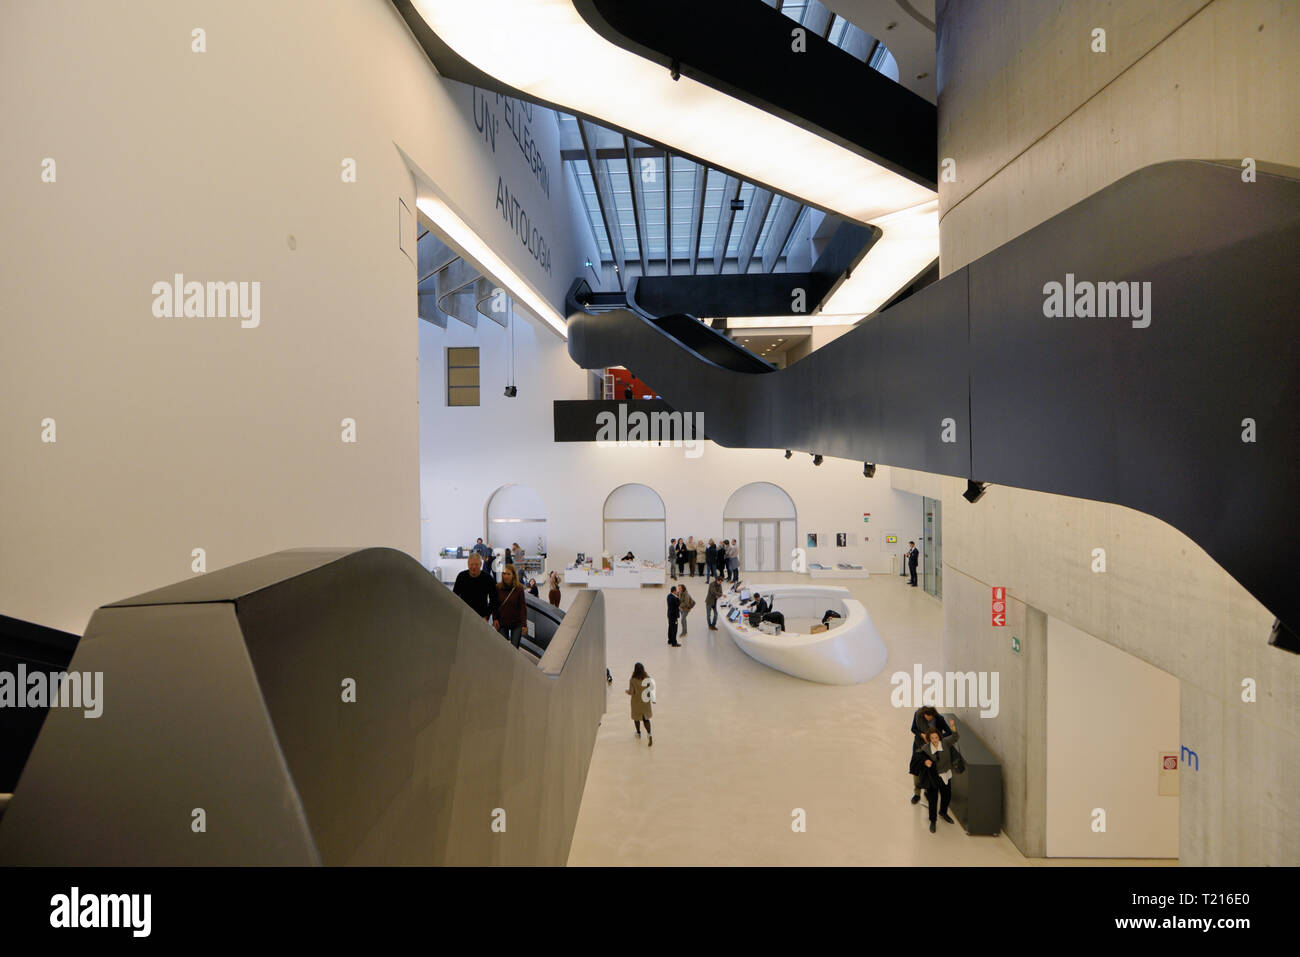 Entrance Hall, Lobby or Foyer Interior MAXXI Art Gallery or Art Museum, National Museum of 21st-Century Arts, Rome designed by Zaha Hadid in 2010 Stock Photo